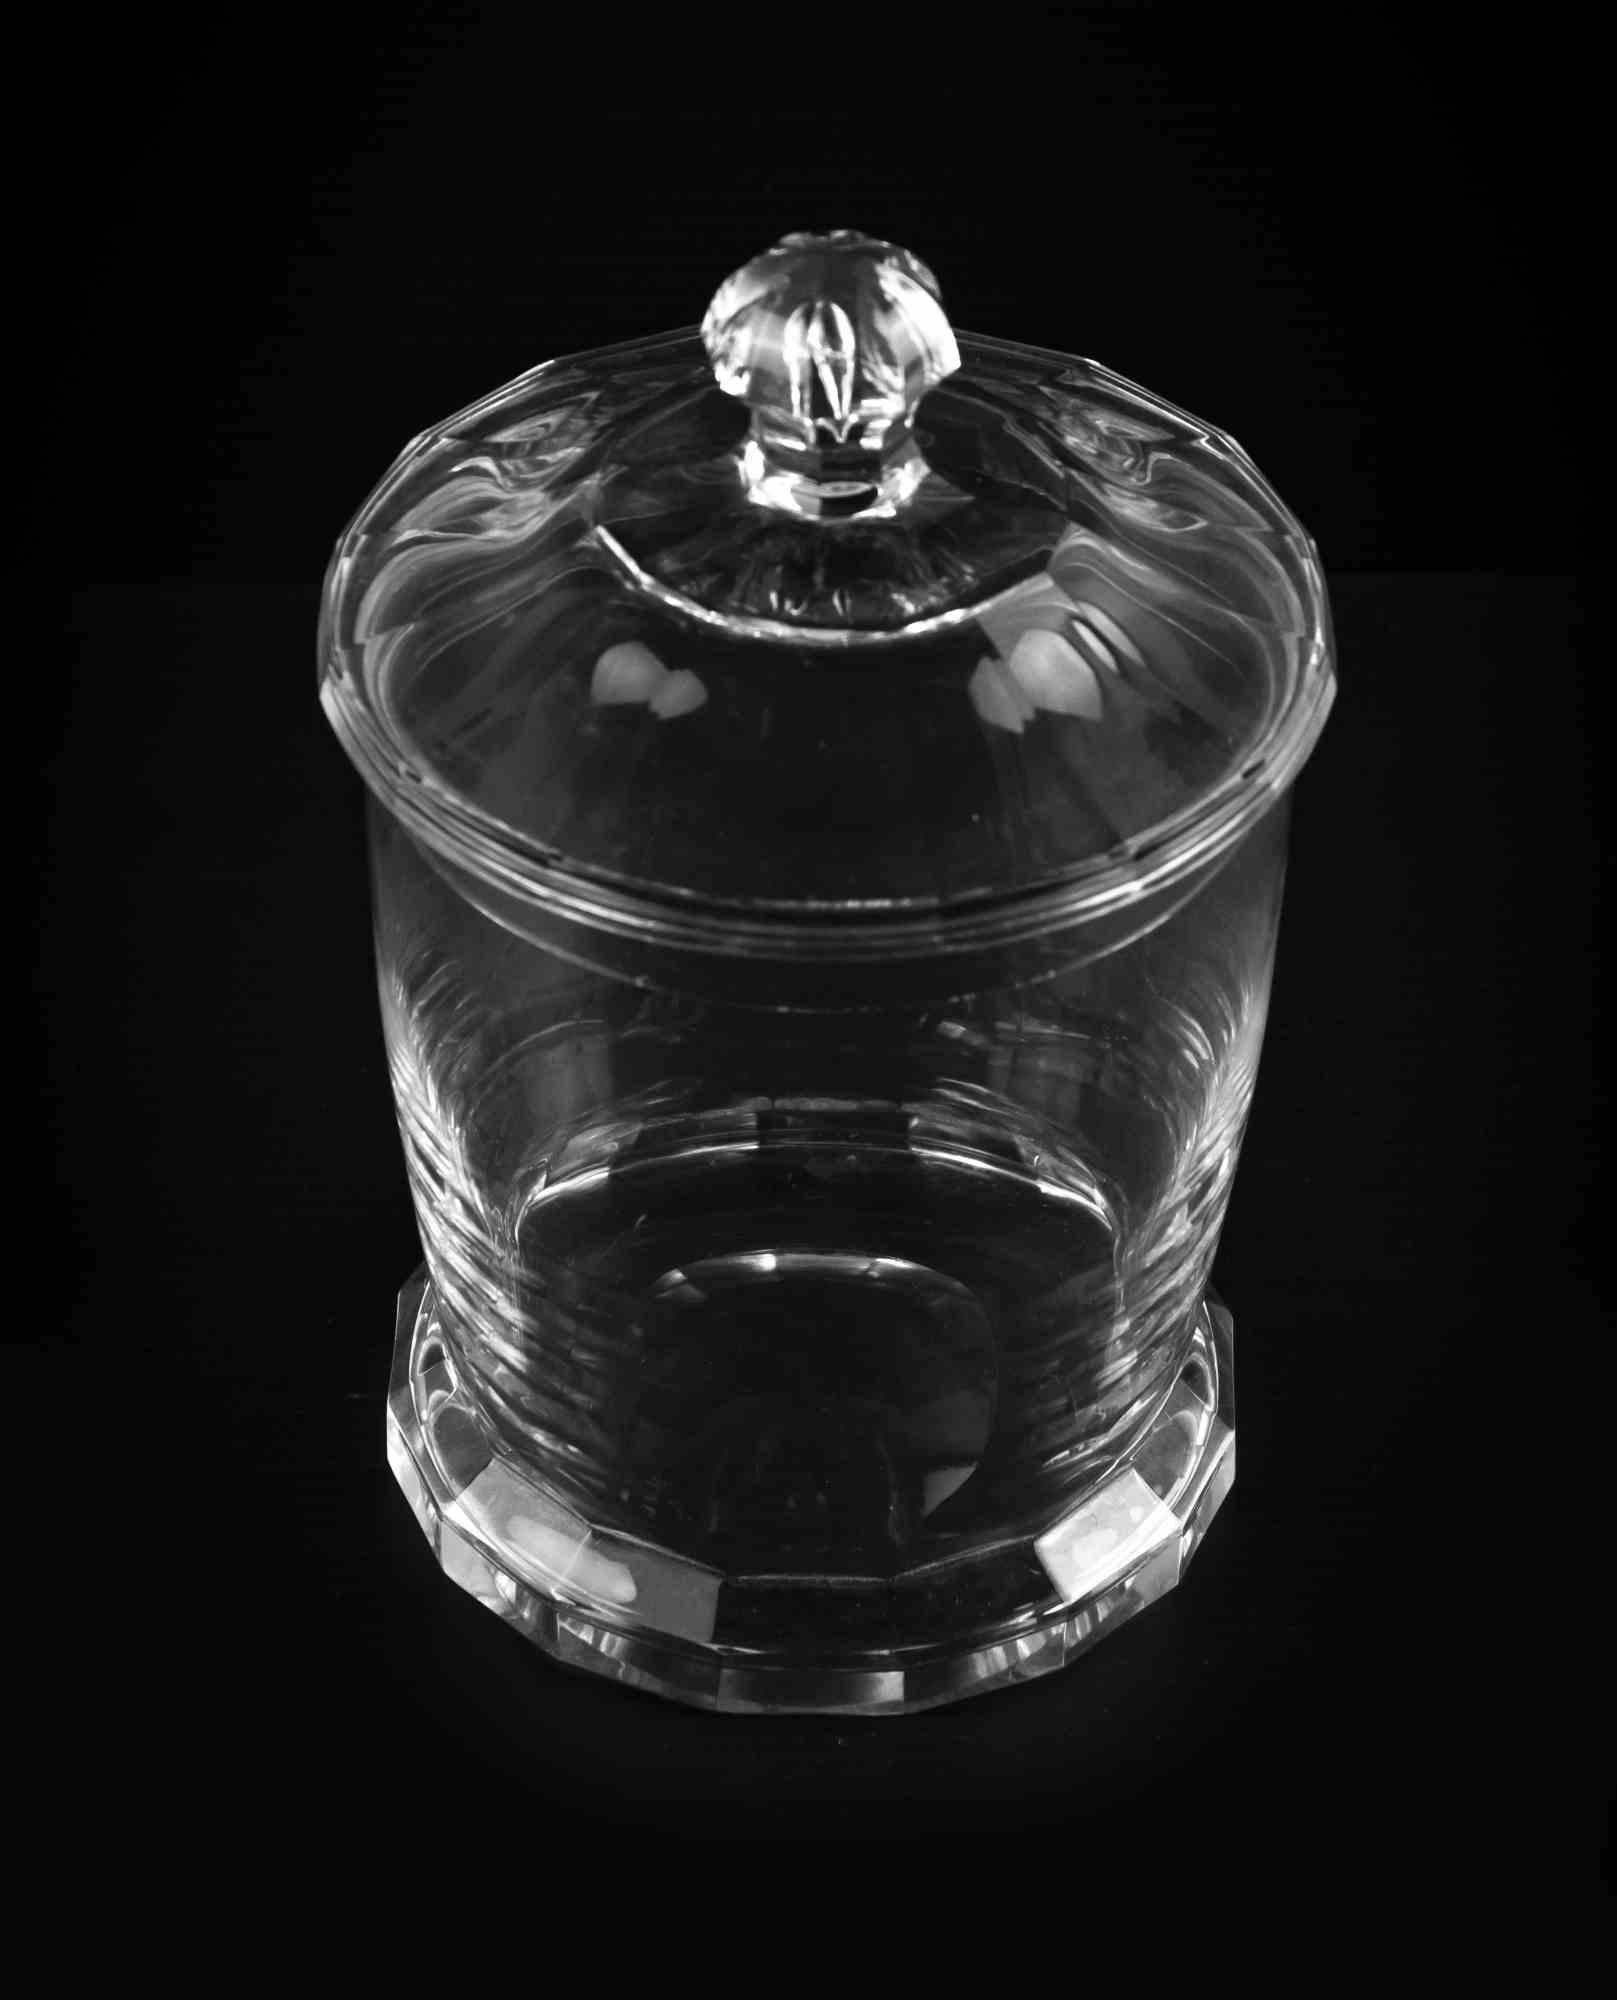 Glass candy box is an original decorative object realized in the 1970s.

Transparent glass object perfect to preserve your candies and give elegance to you table!

Good conditions except for a scratch chipping.